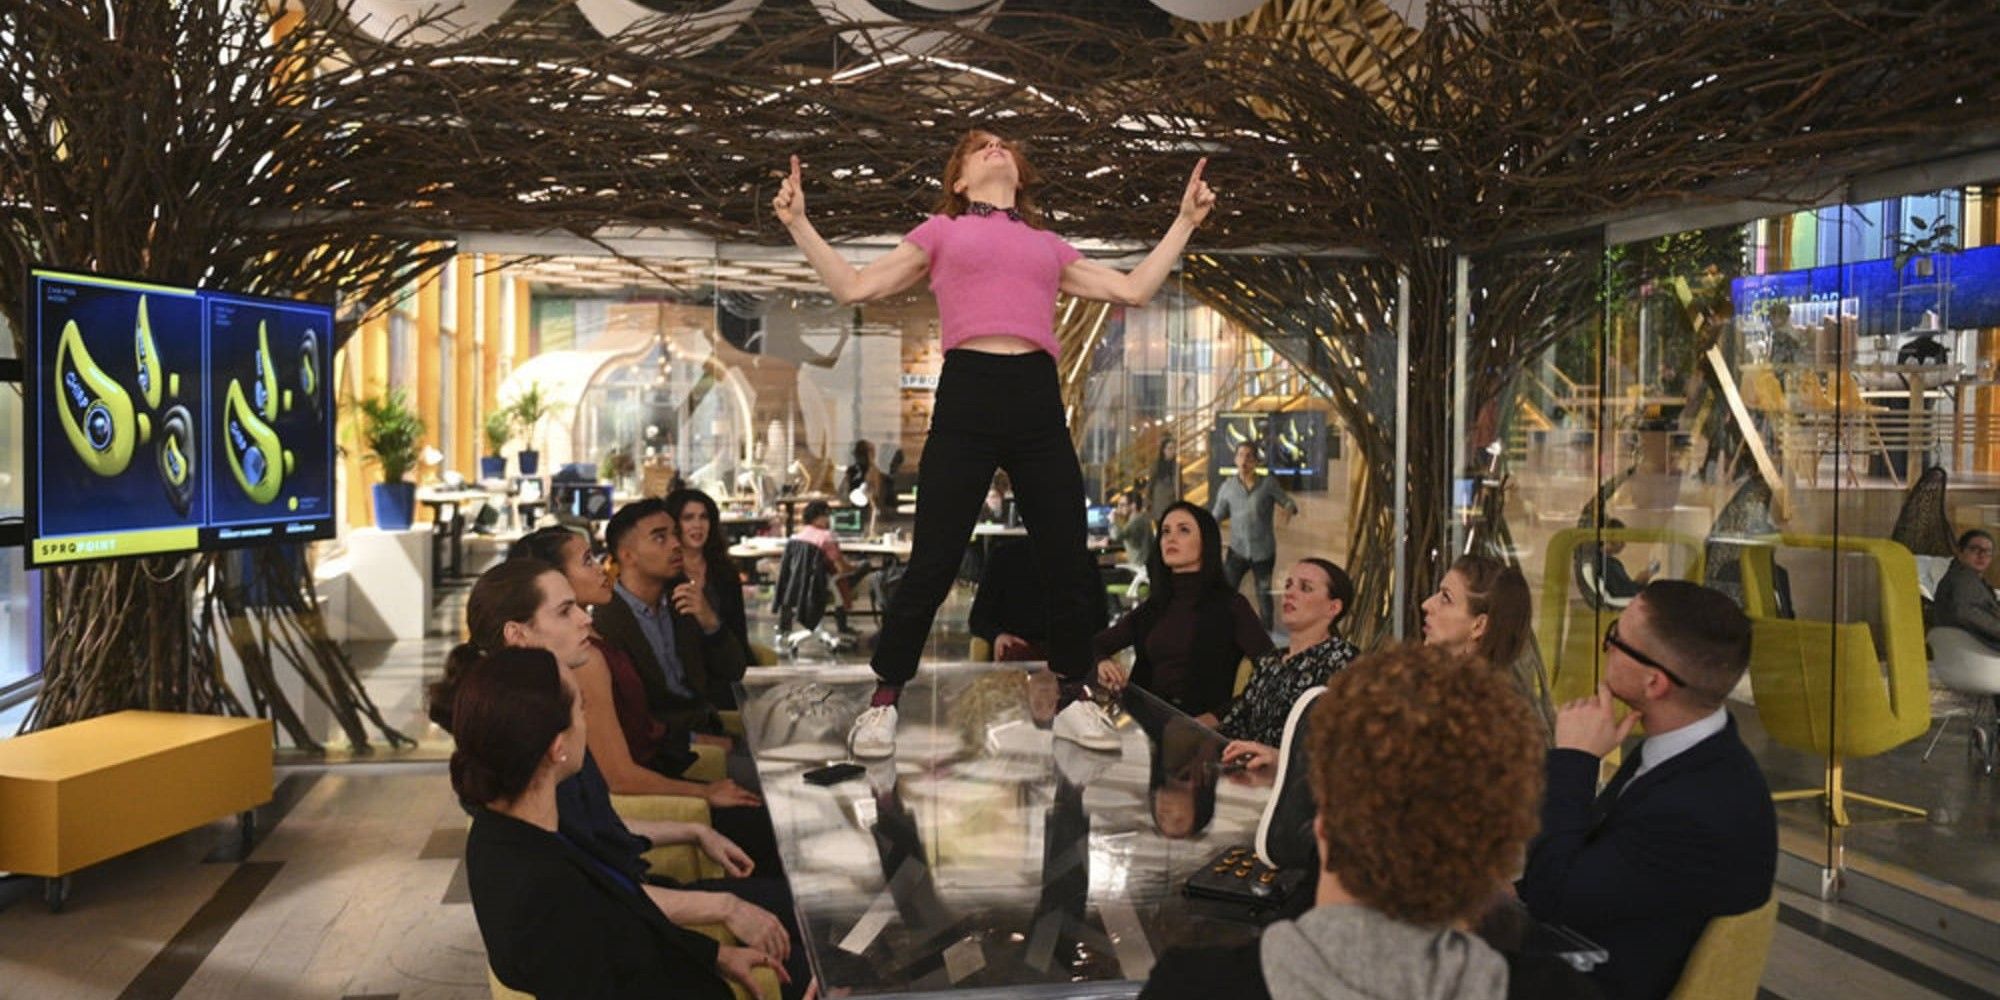 Jane Levy performance on the table 